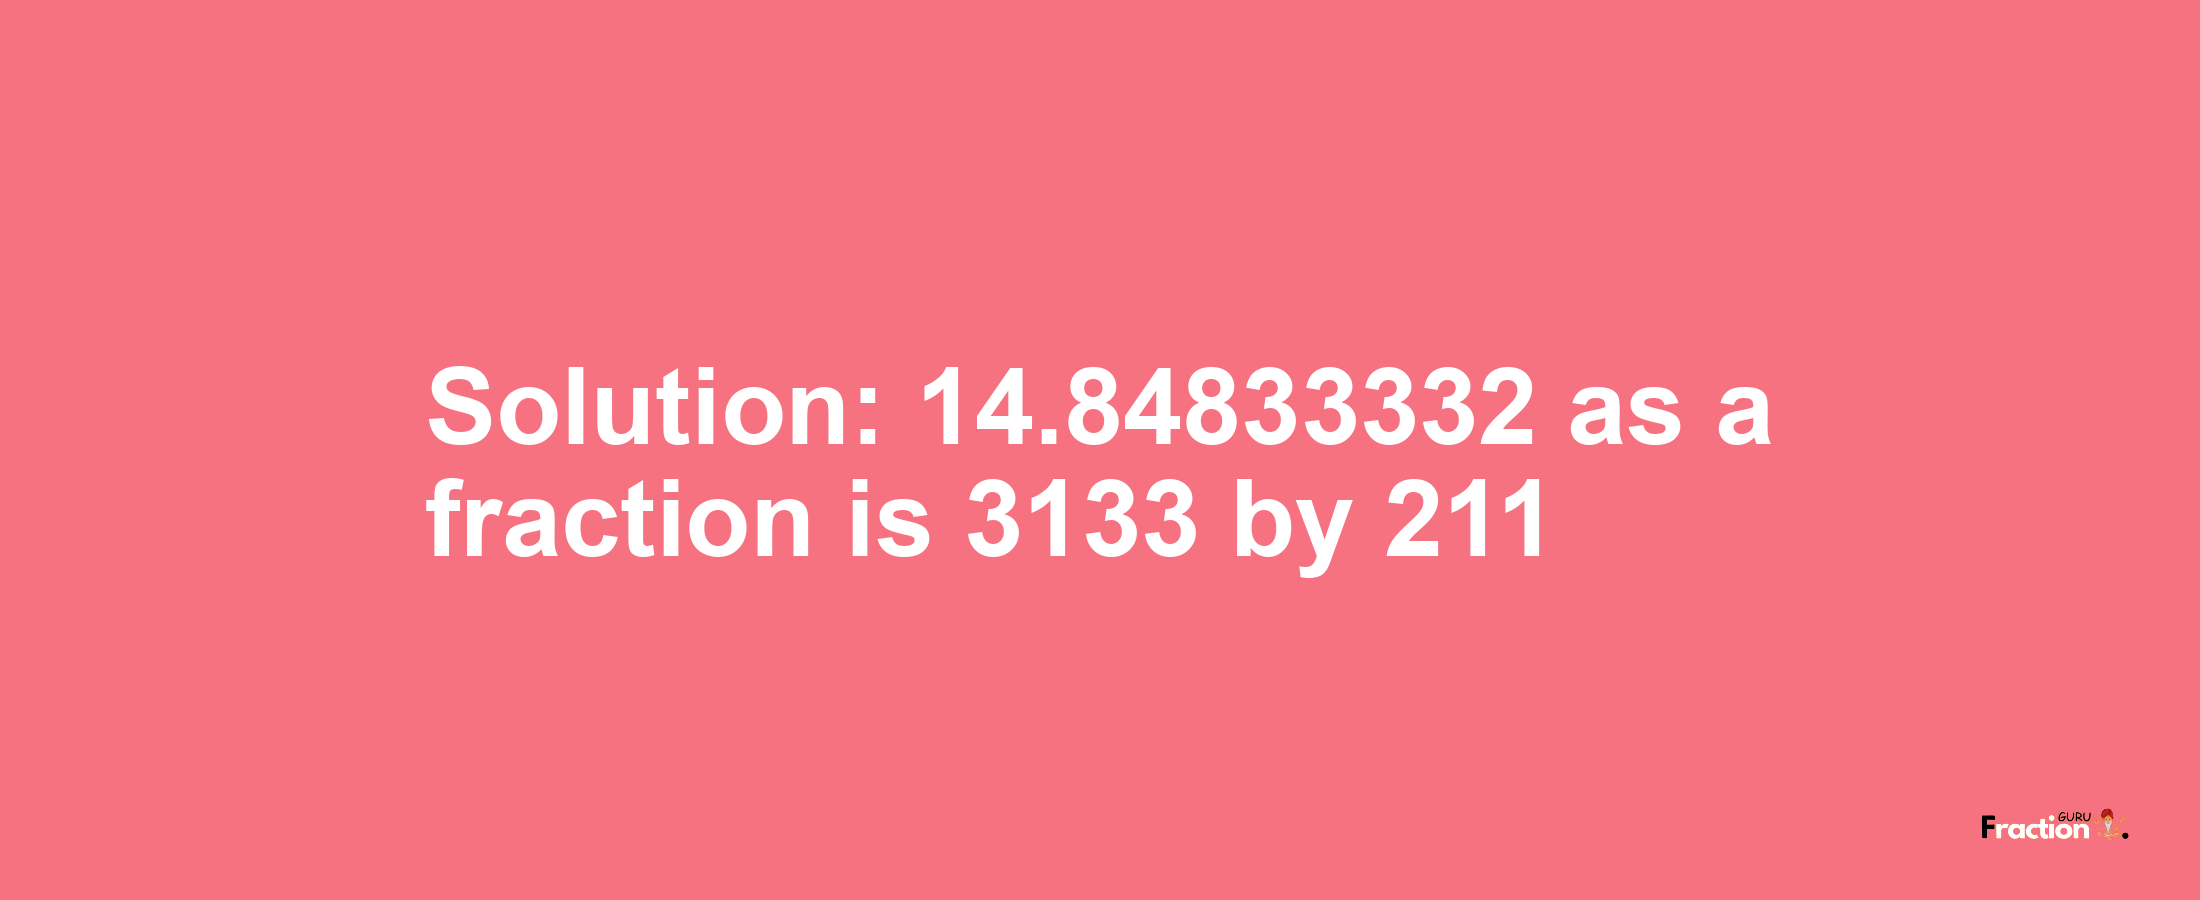 Solution:14.84833332 as a fraction is 3133/211